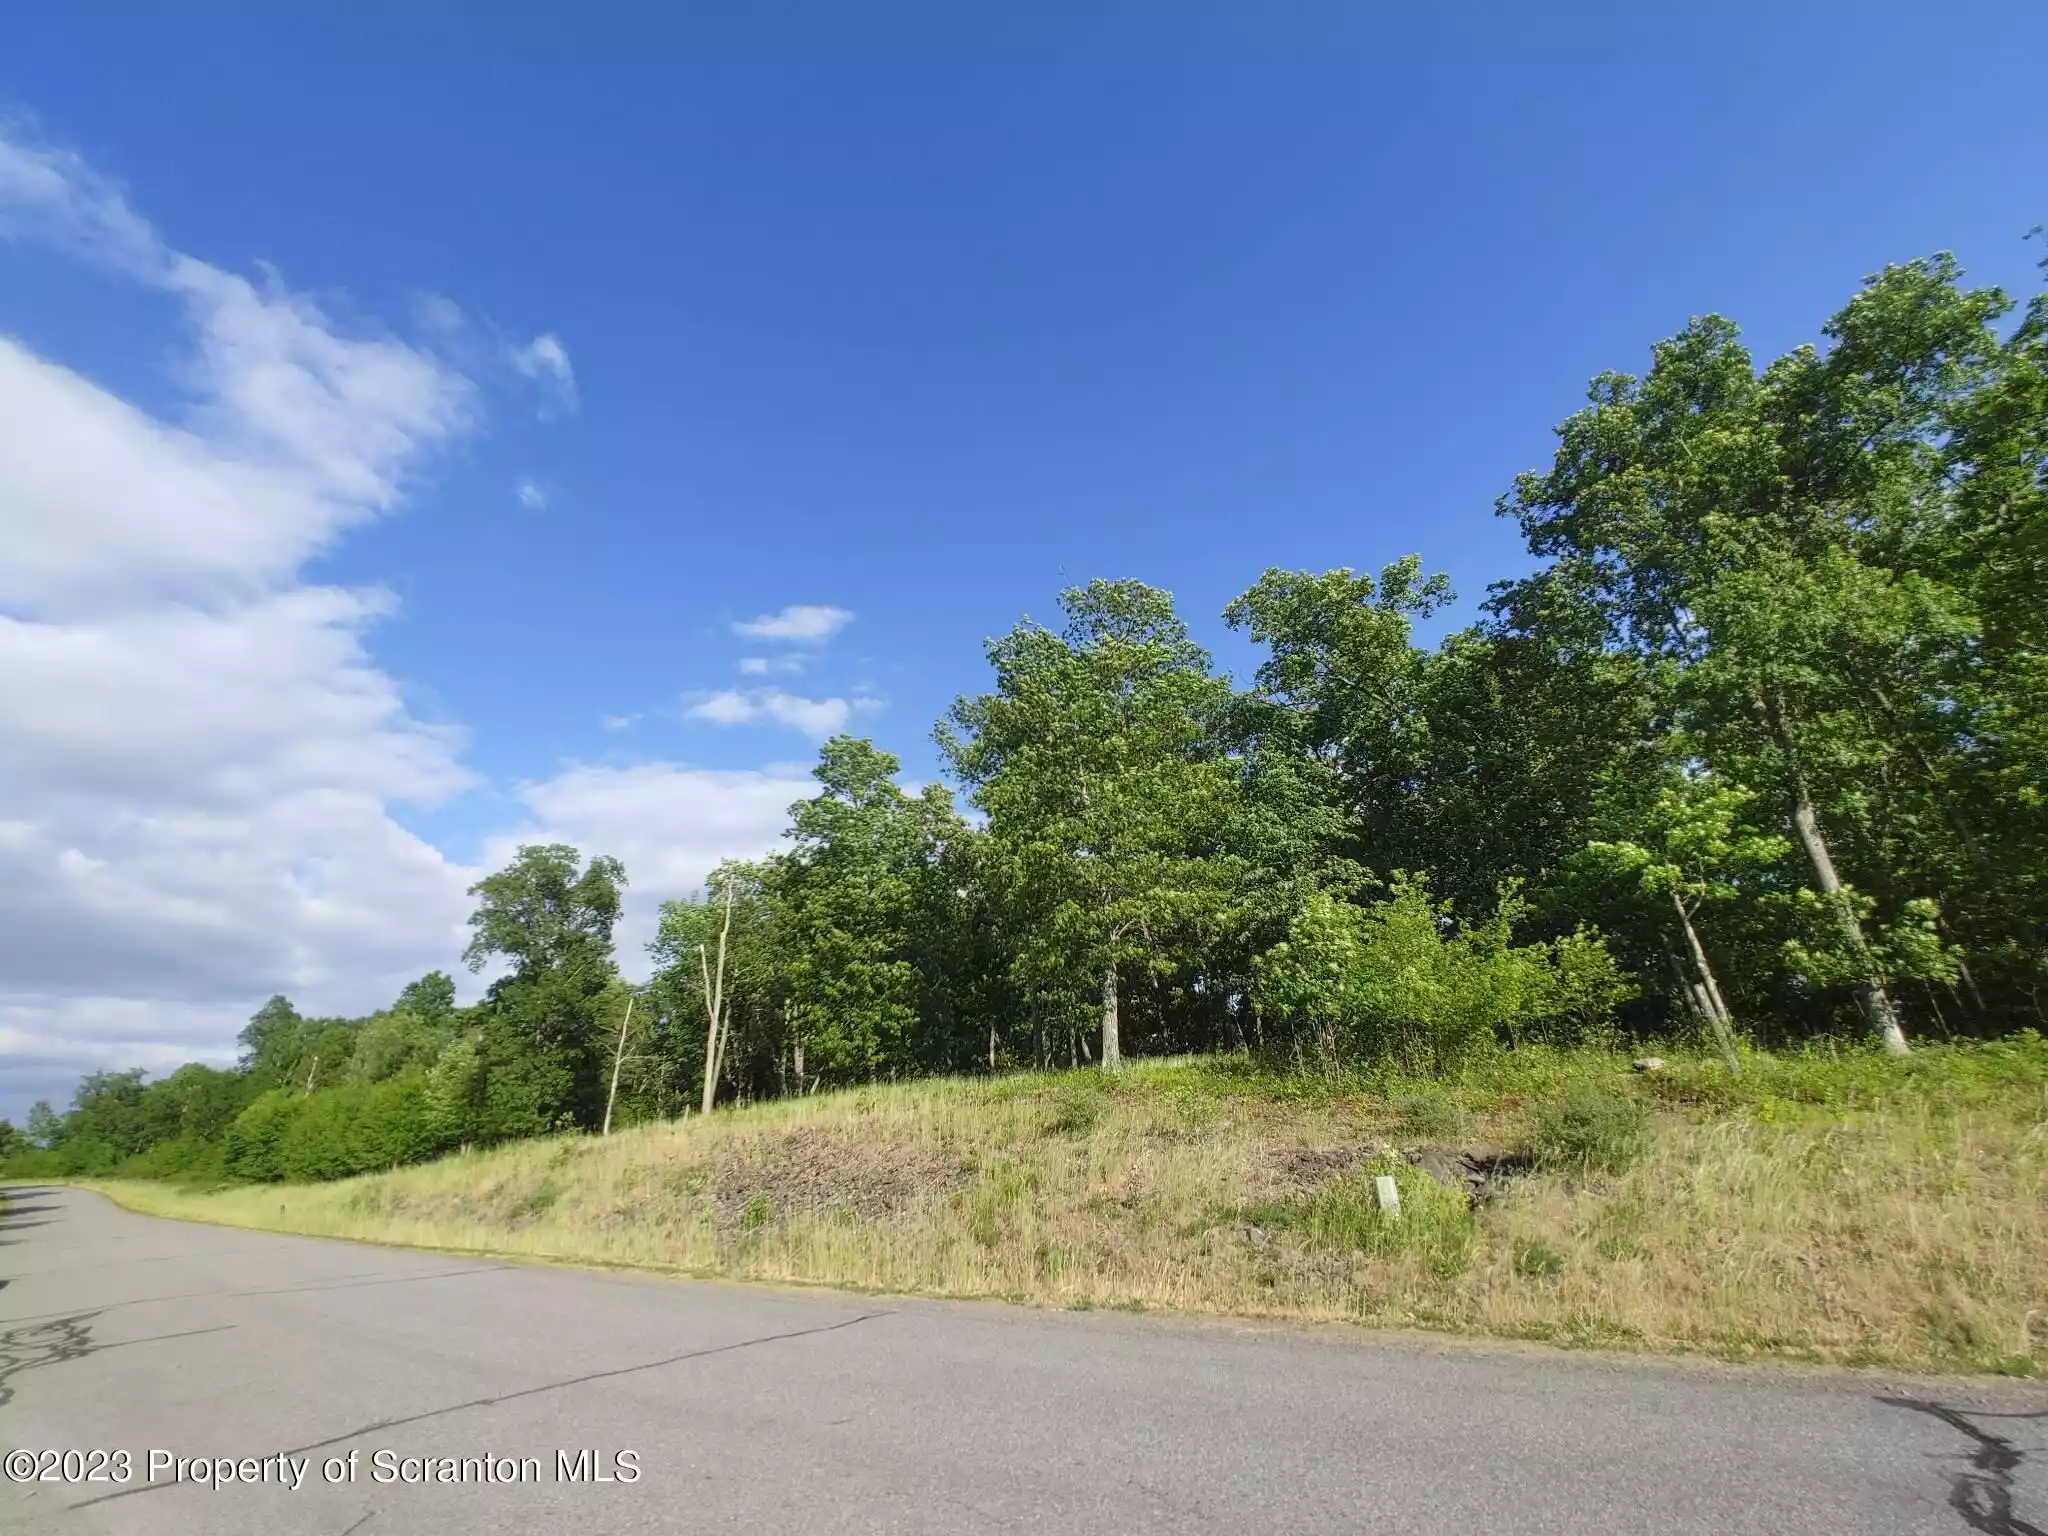 83 Scenicview Dr, Dallas, Pennsylvania 18612, ,Land,For Sale,83 Scenicview Dr,GSB232235